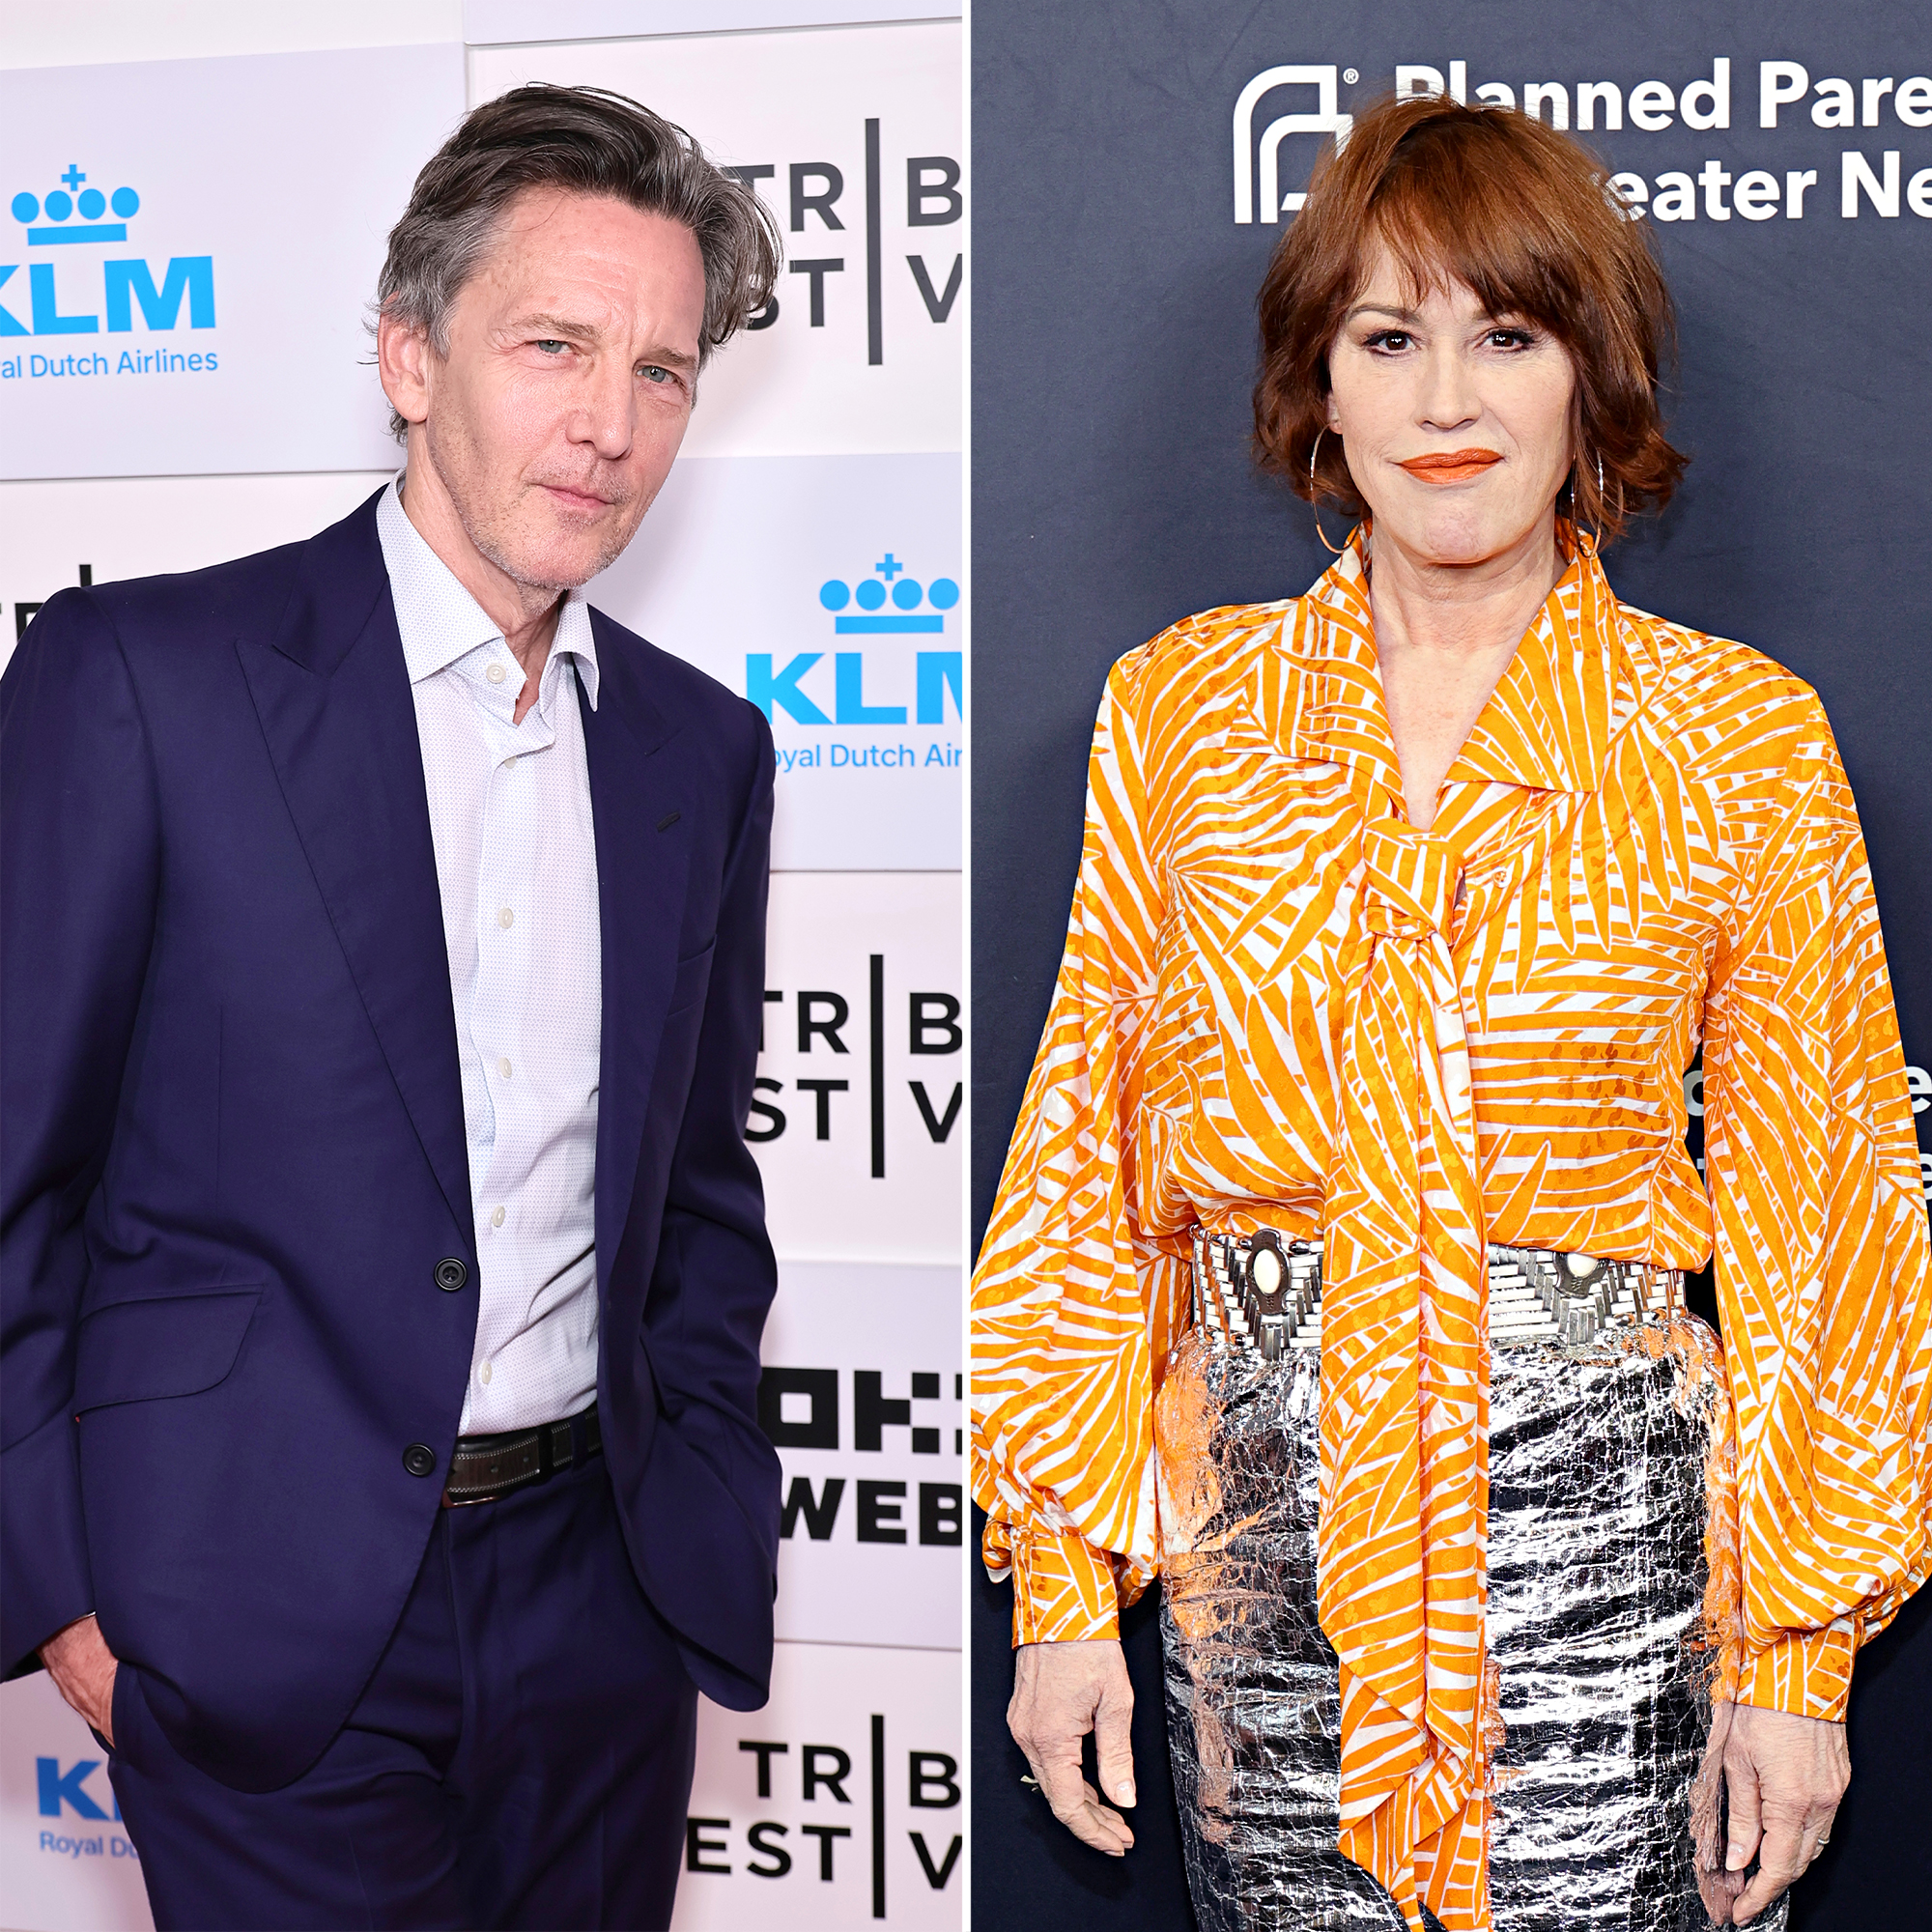 Andrew McCarthy on Why Molly Ringwald Skipped 'Brats' Documentary